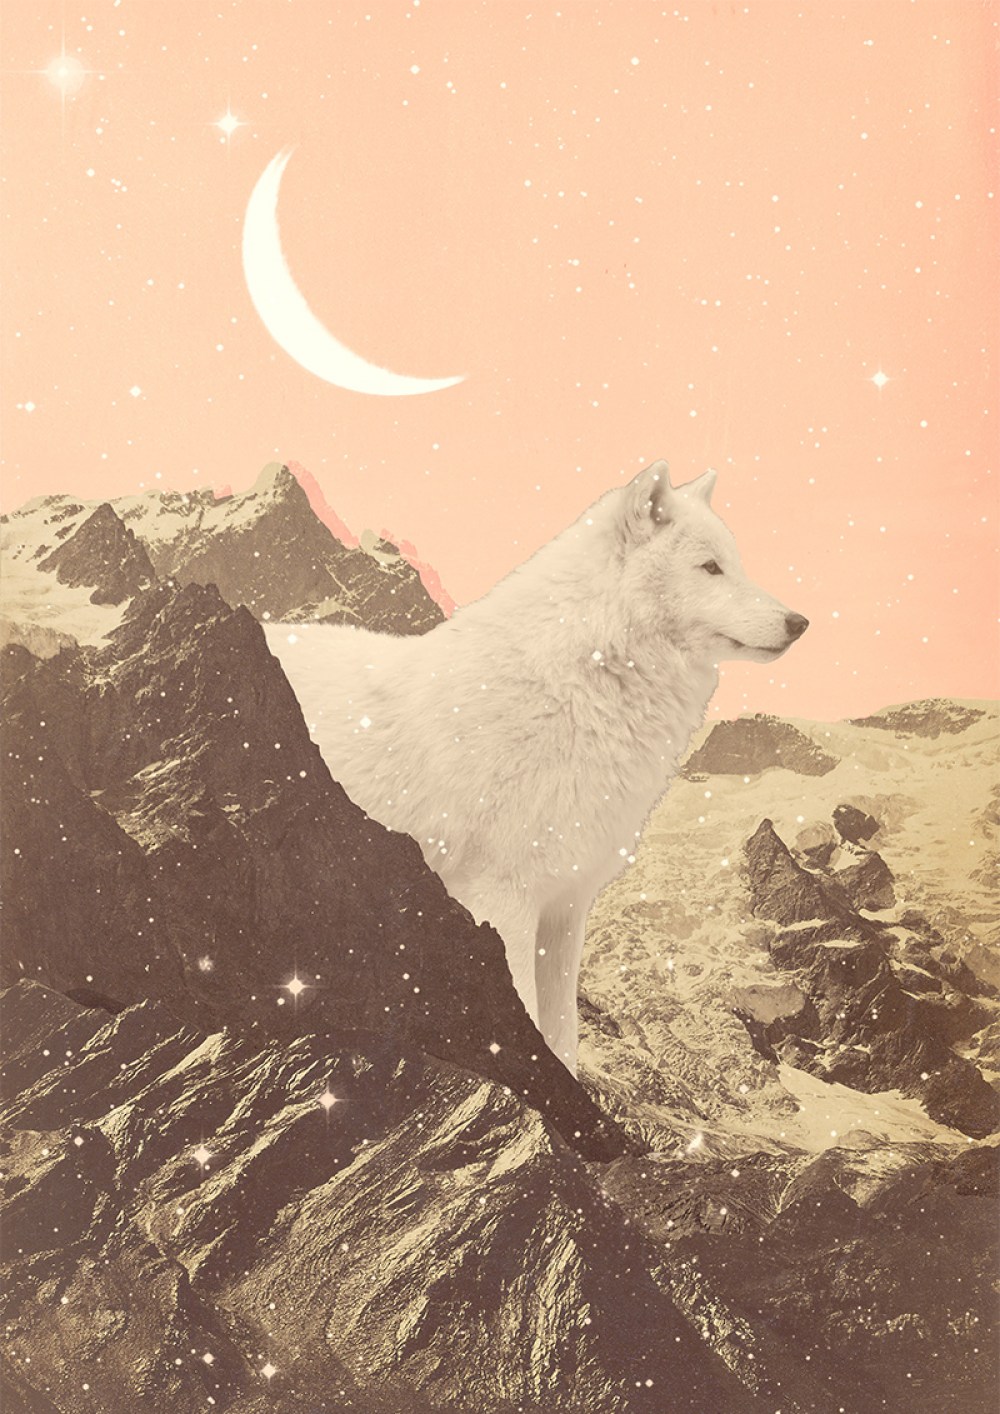 <dive><h1>Giant White Wolf in Mountains</h1></dive>